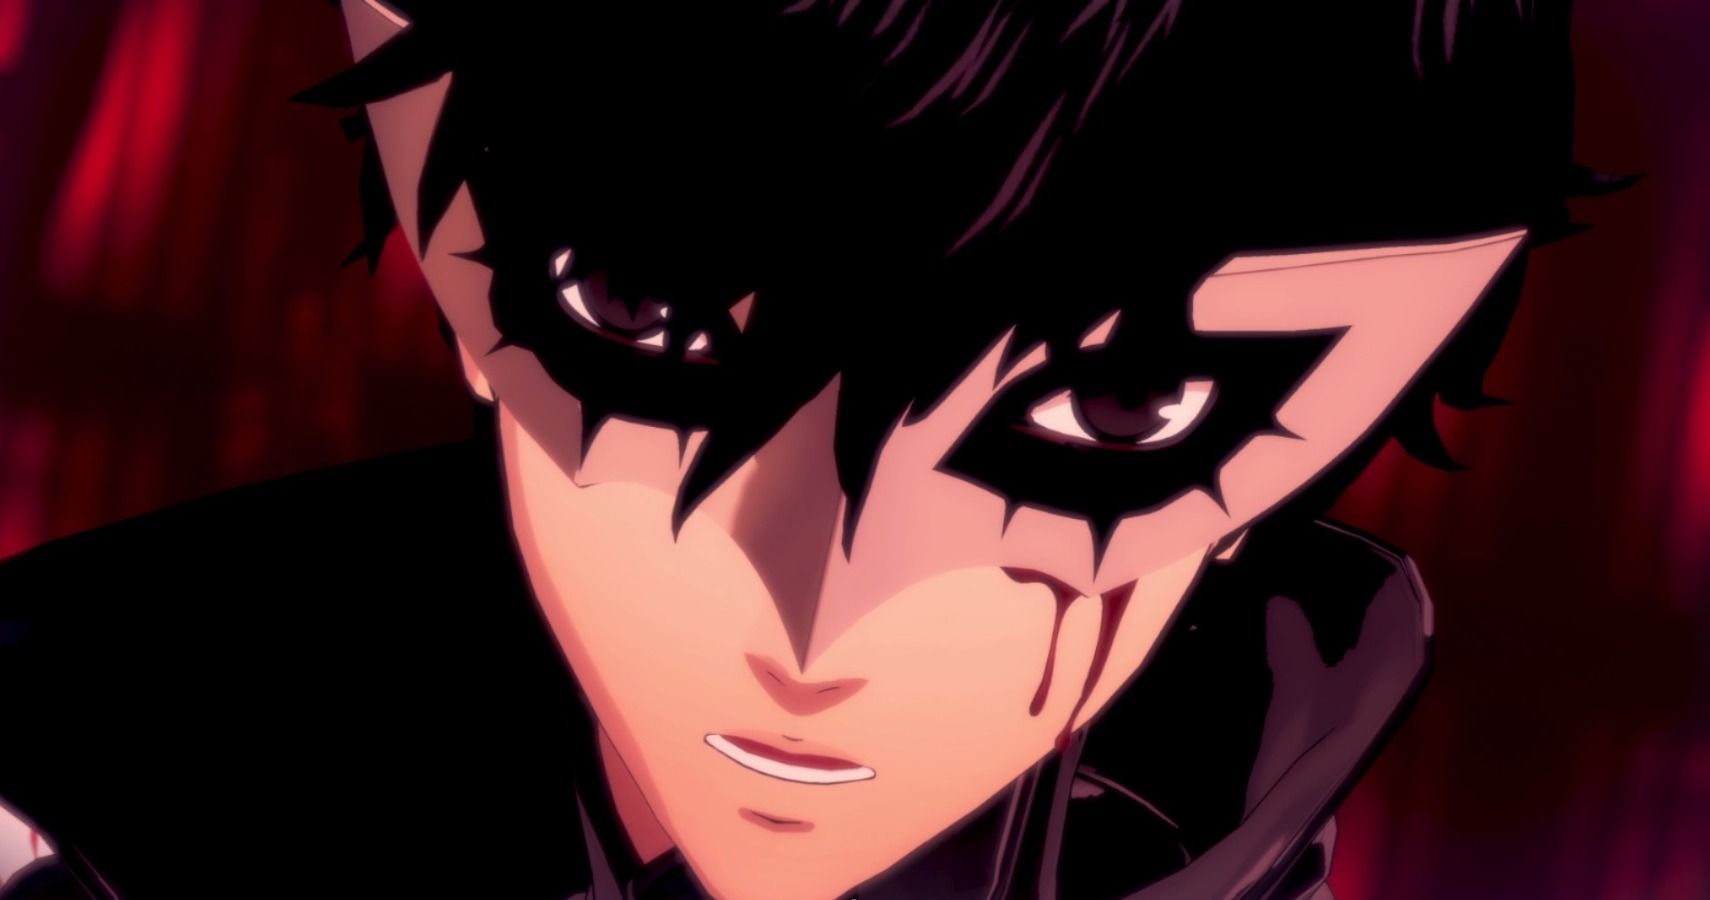 Persona 5 Strikers Switch Version Feels Well-Suited for the System